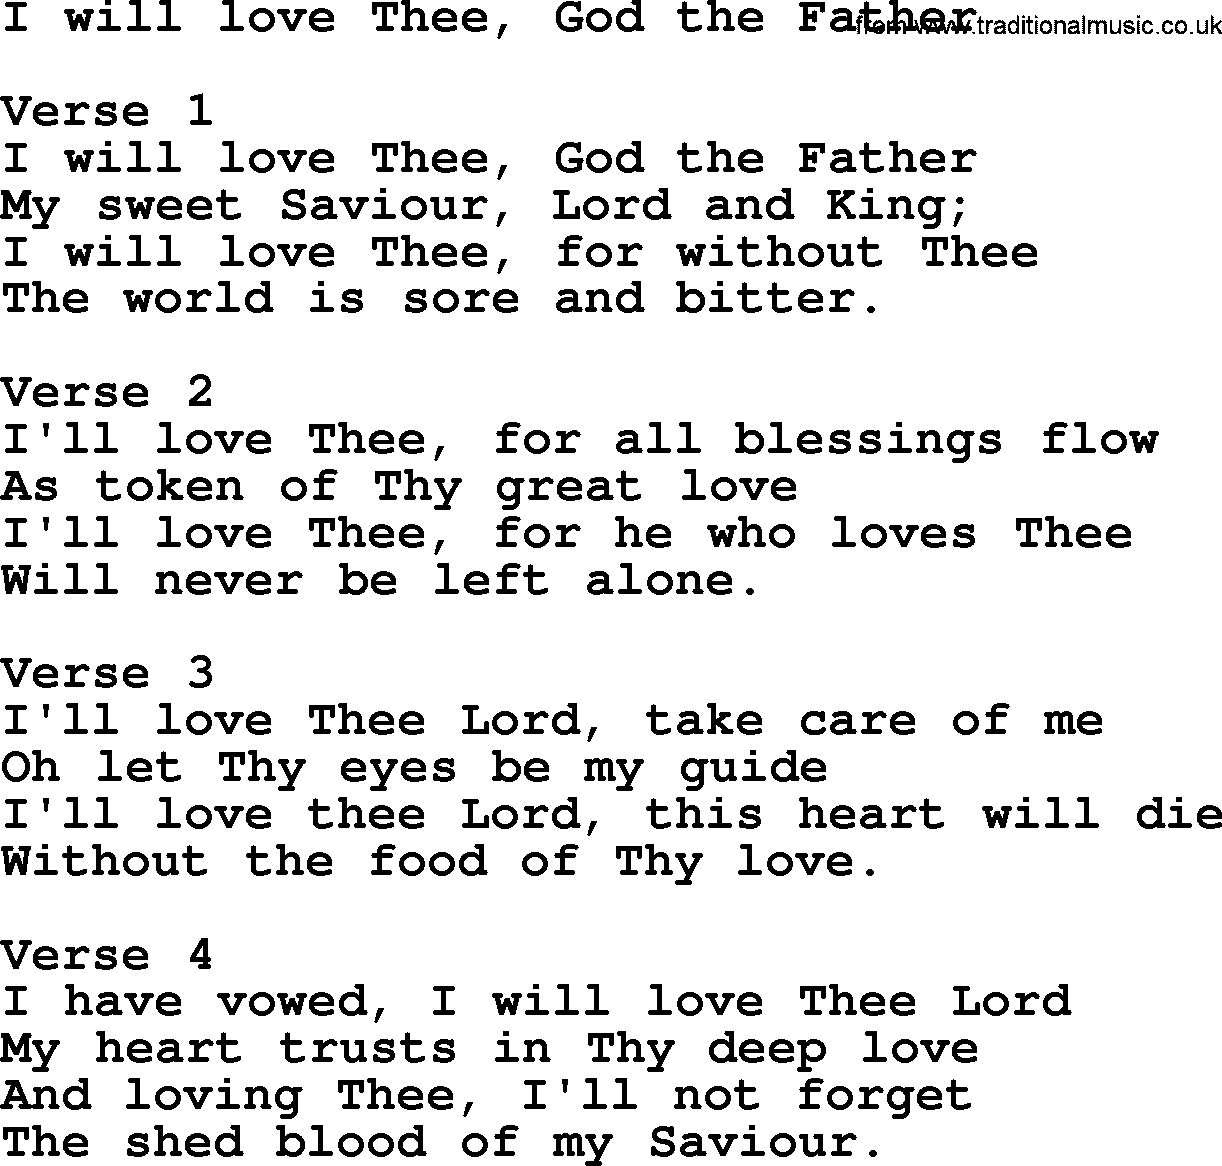 Apostolic and Pentecostal Hymns and Gospel Songs, Hymn: I Will Love Thee, God The Father, Christian lyrics and PDF